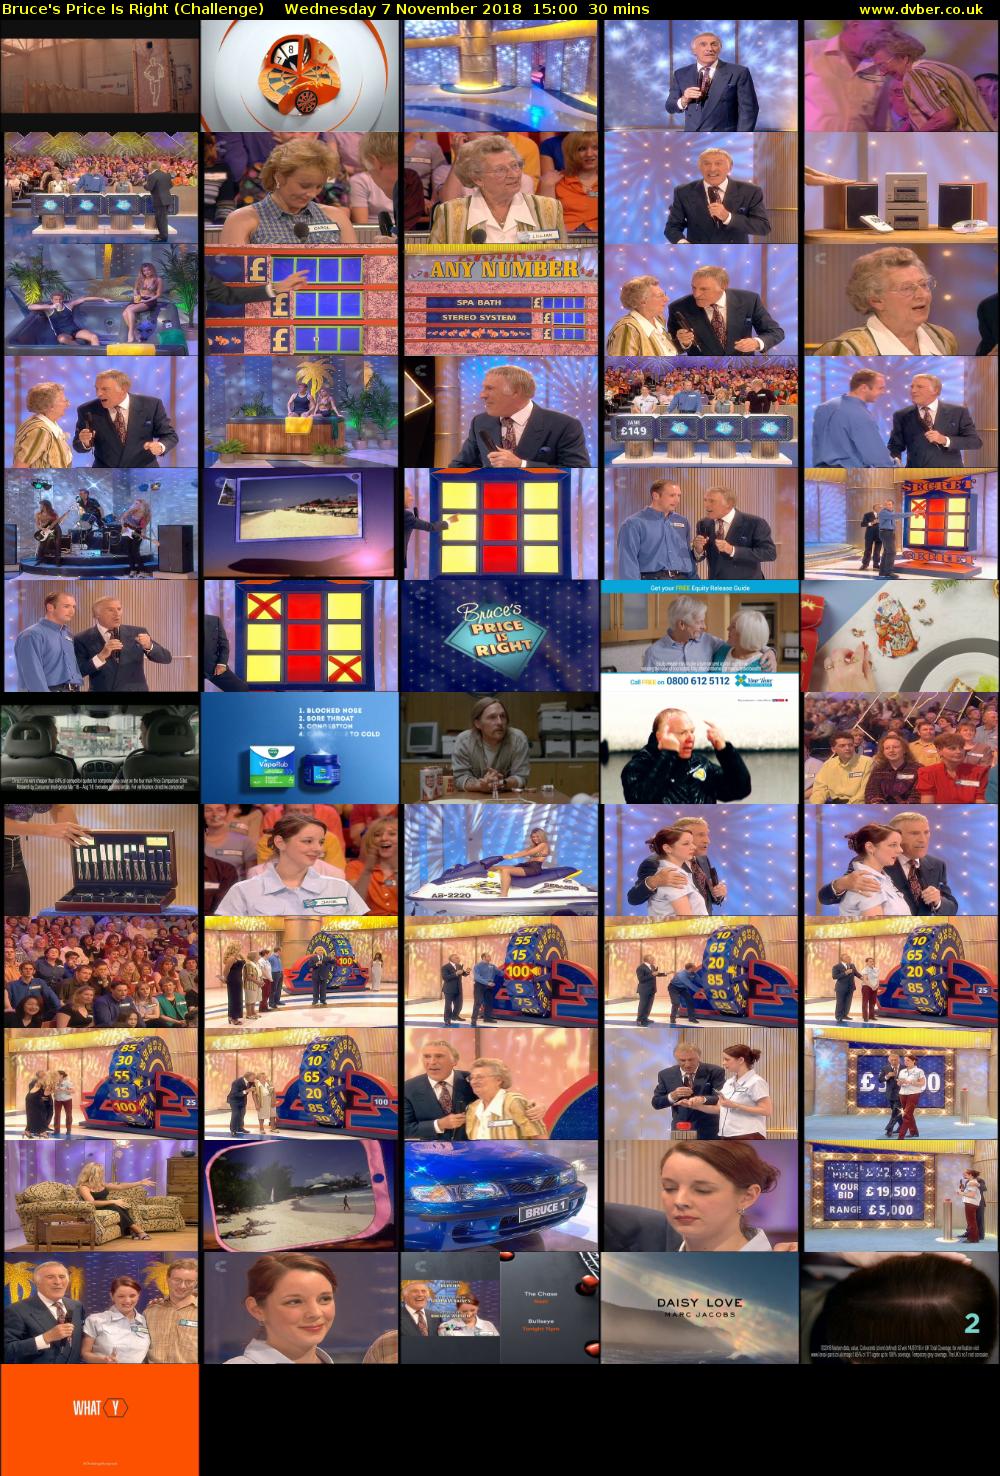 Bruce's Price Is Right (Challenge) Wednesday 7 November 2018 15:00 - 15:30